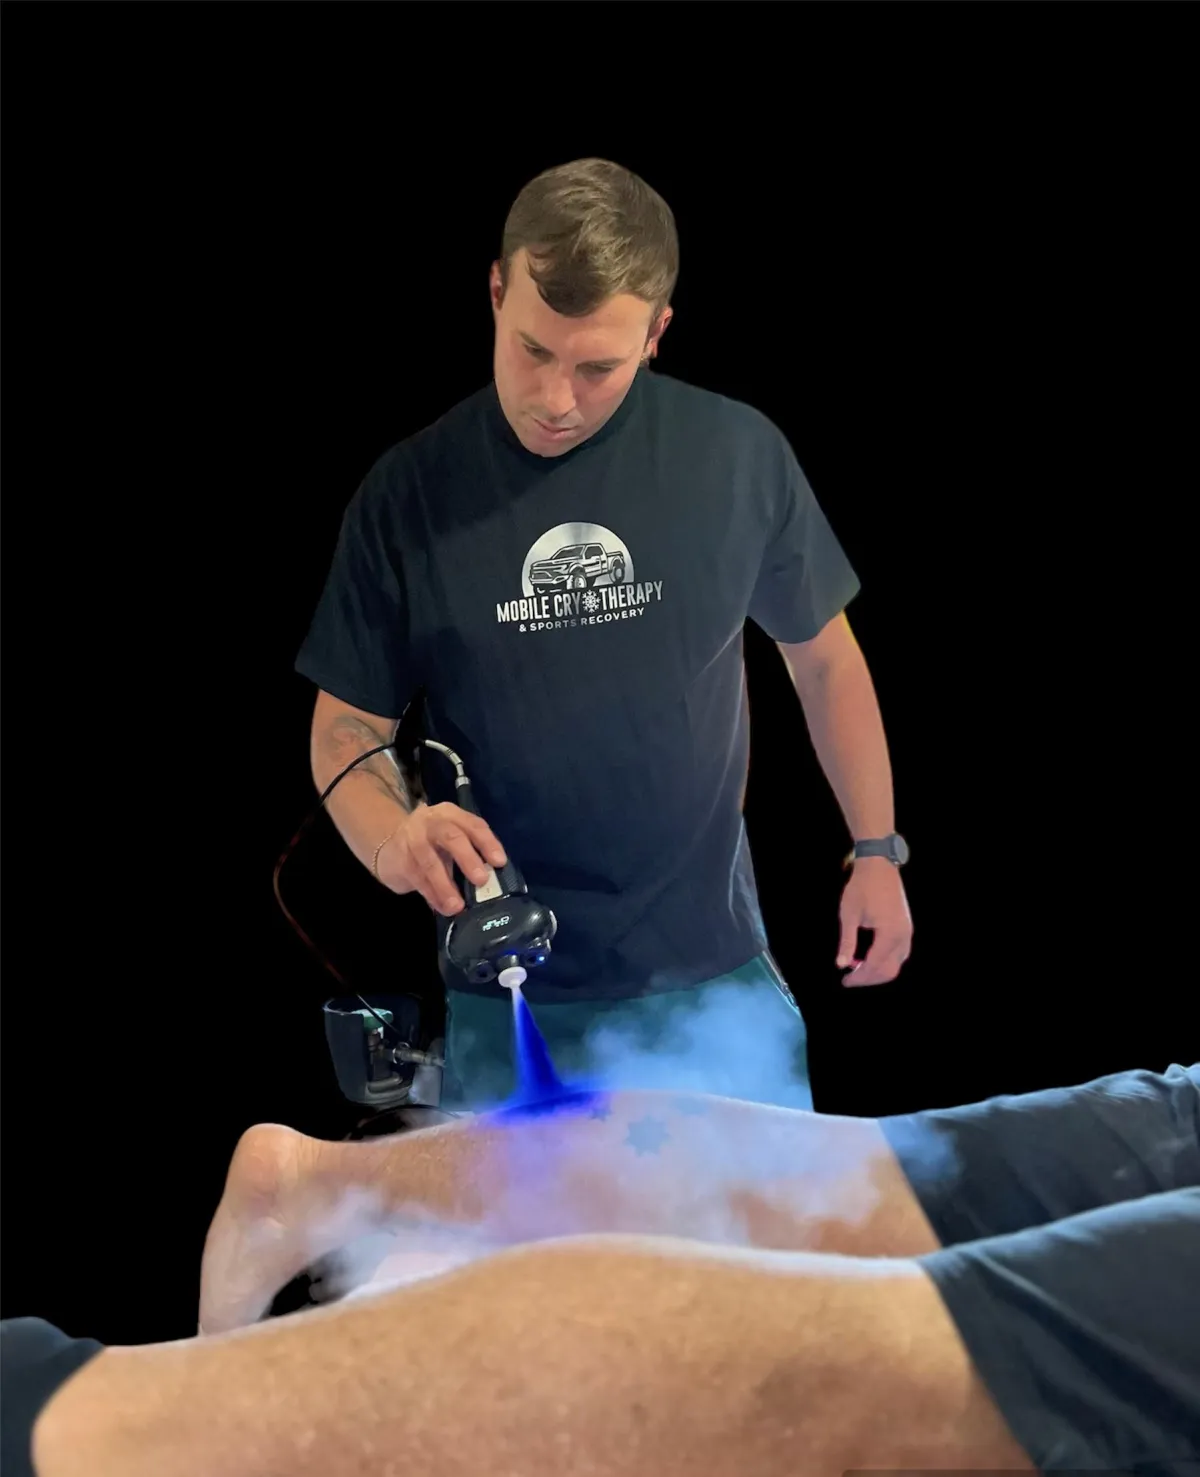 Localised cryotherapy